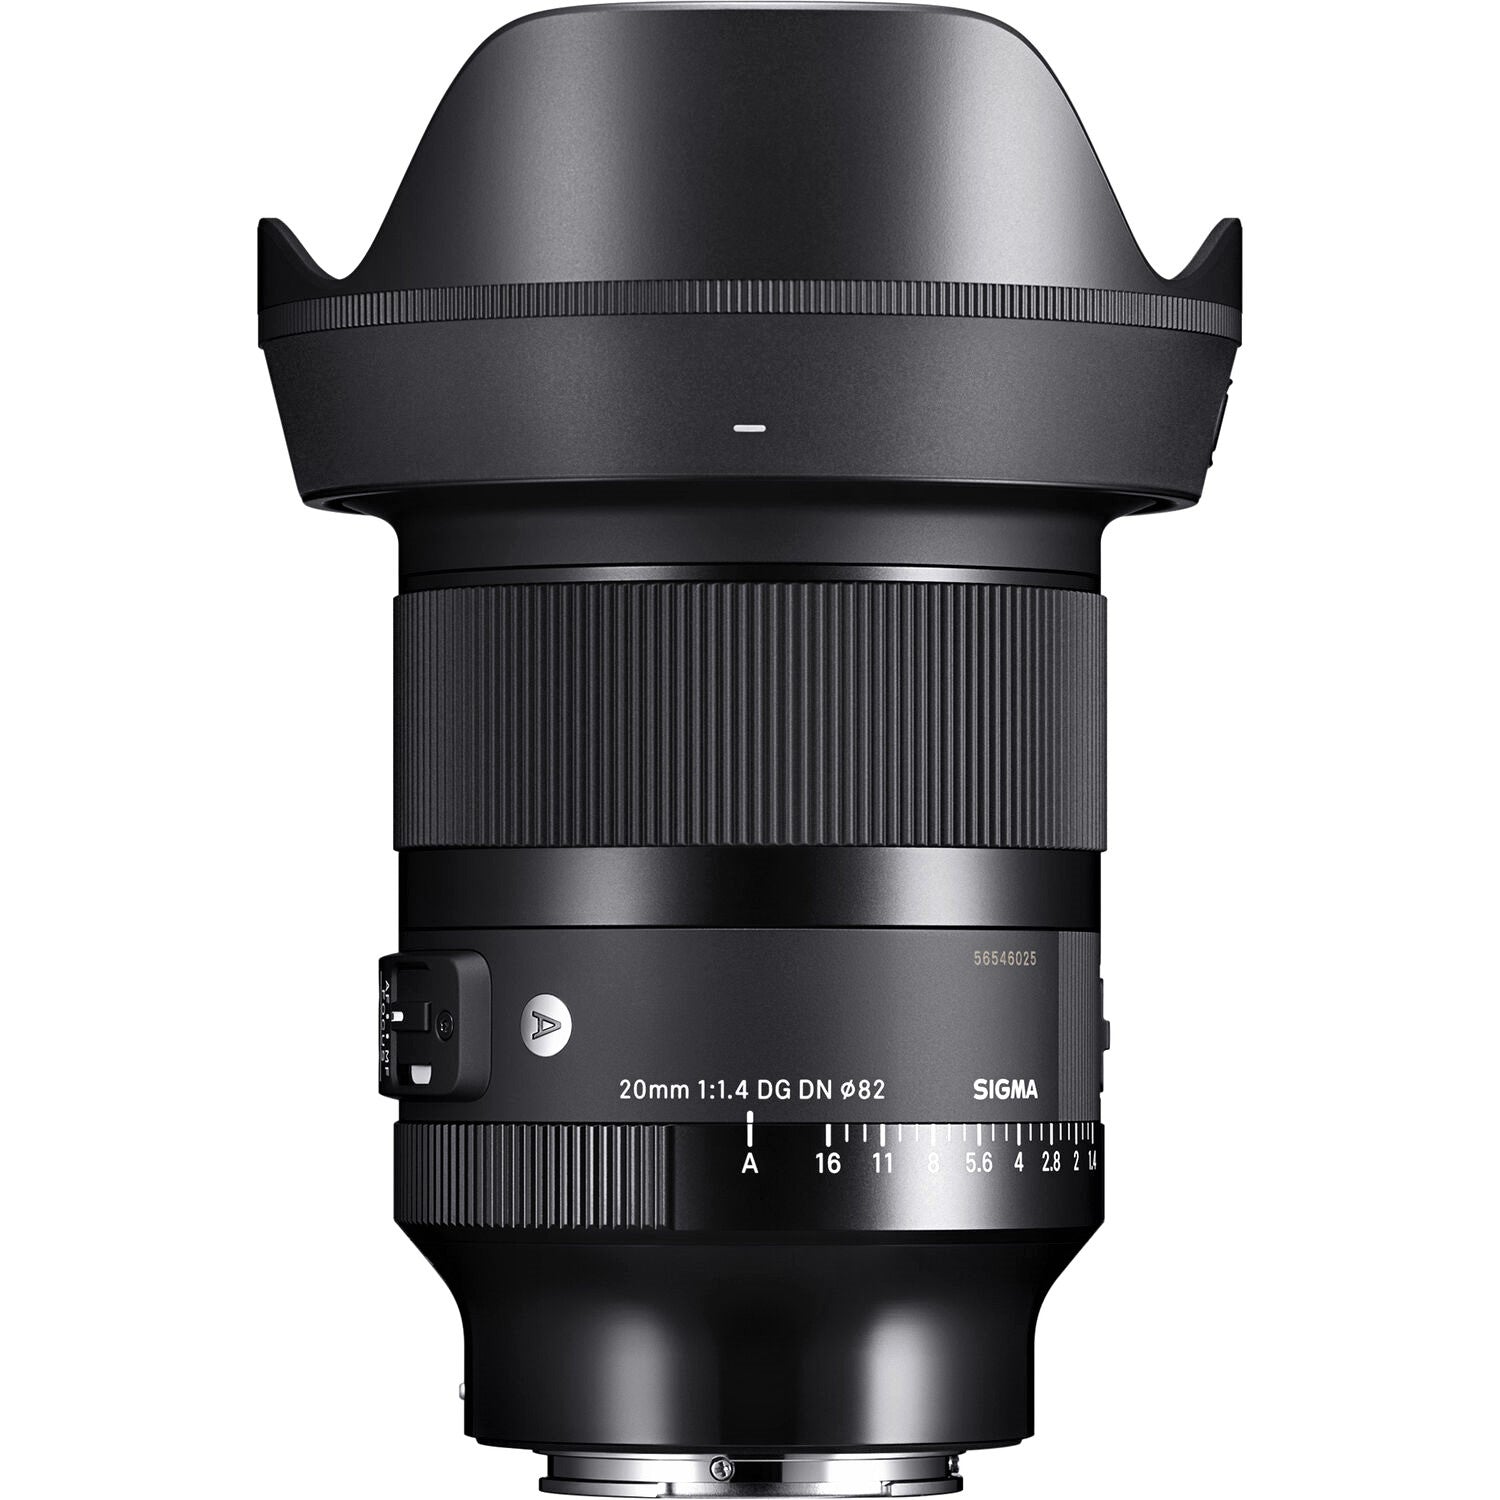 Sigma 20mm F1.4 DG DN Art Lens (Sony E Mount) with Attached Lens Hood on the Top